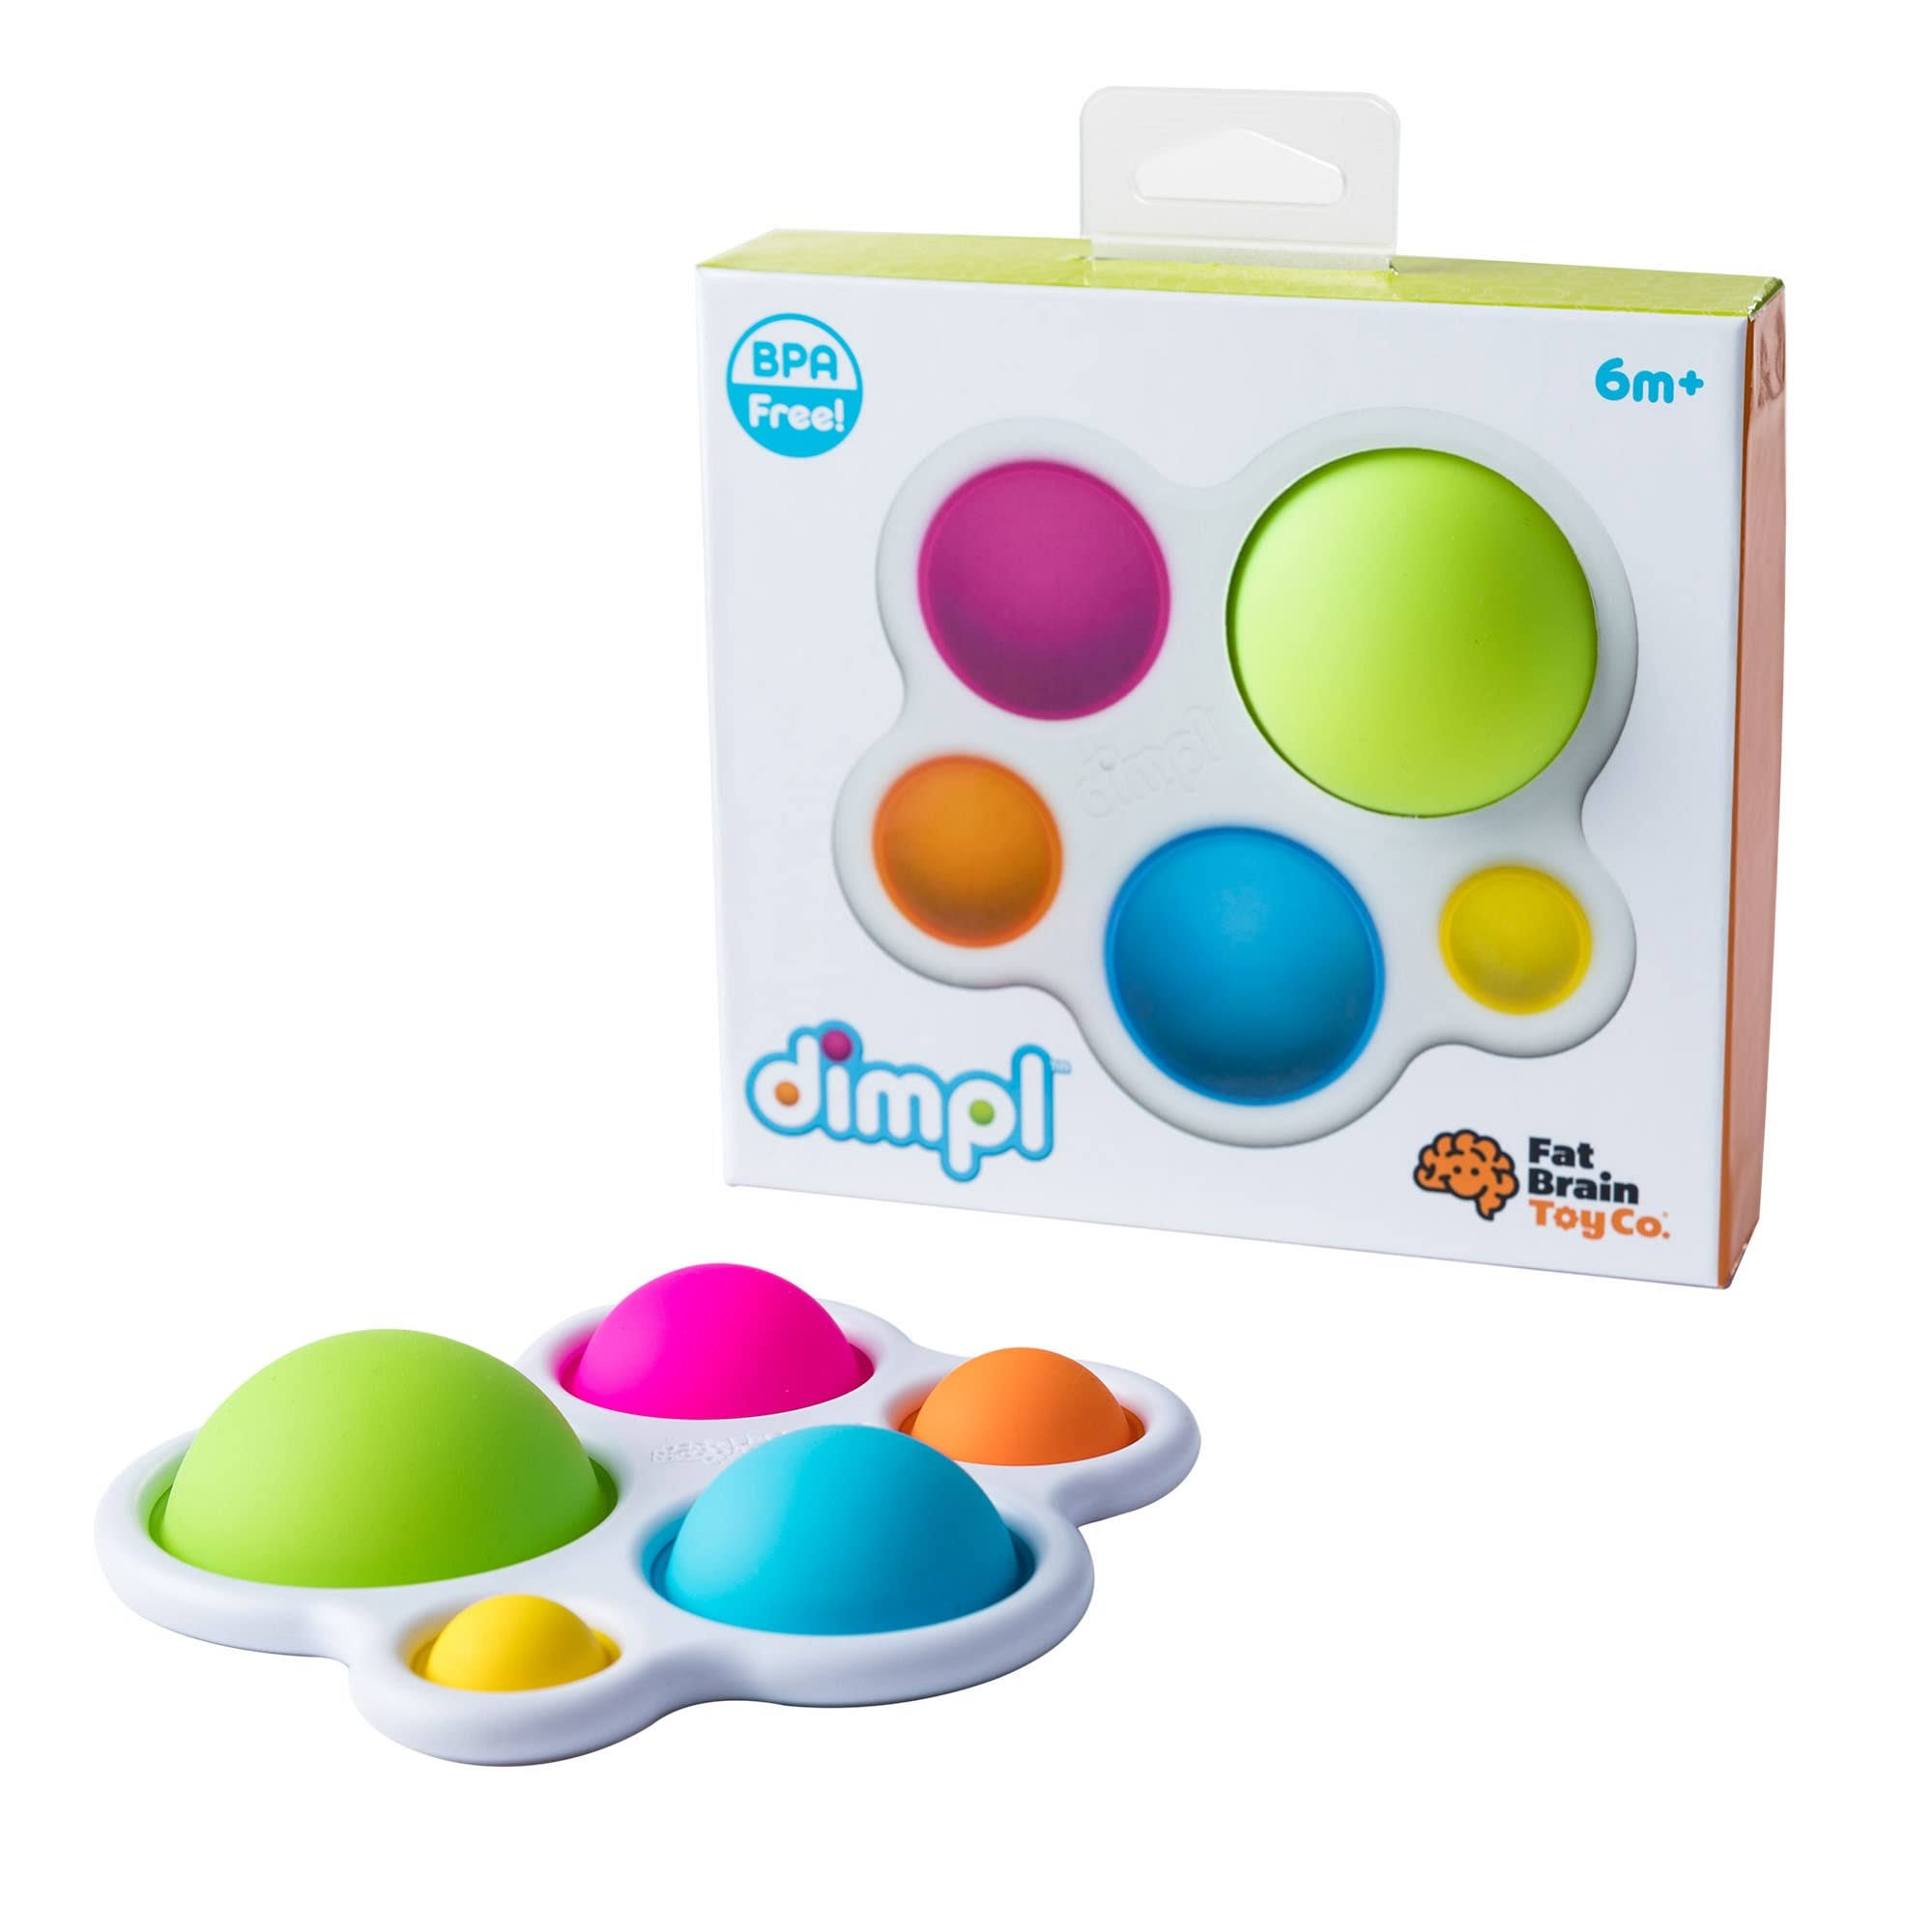 Dimpl Babies Motor Skill Toy - 6 months